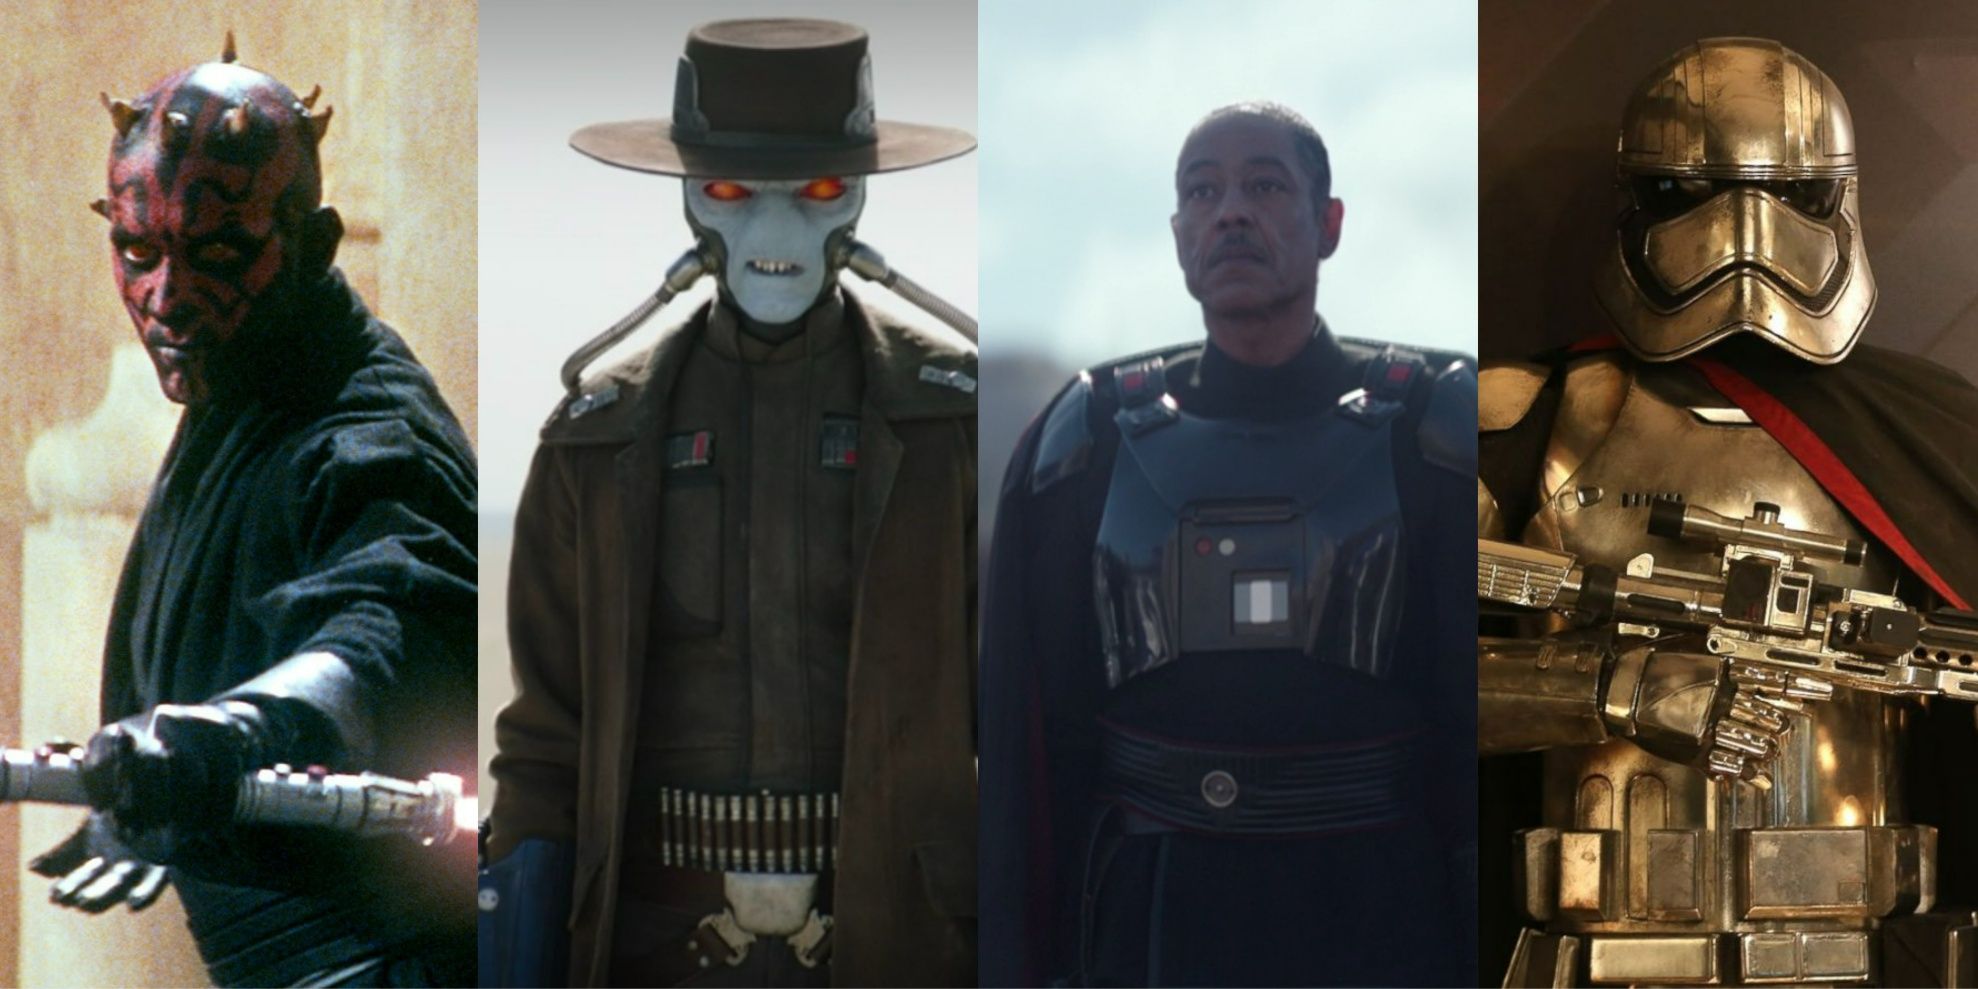 Images of four Star Wars Villans appear side by side, Darth Maul, Cad Bane, Moff Gideon, and Captain Phasma